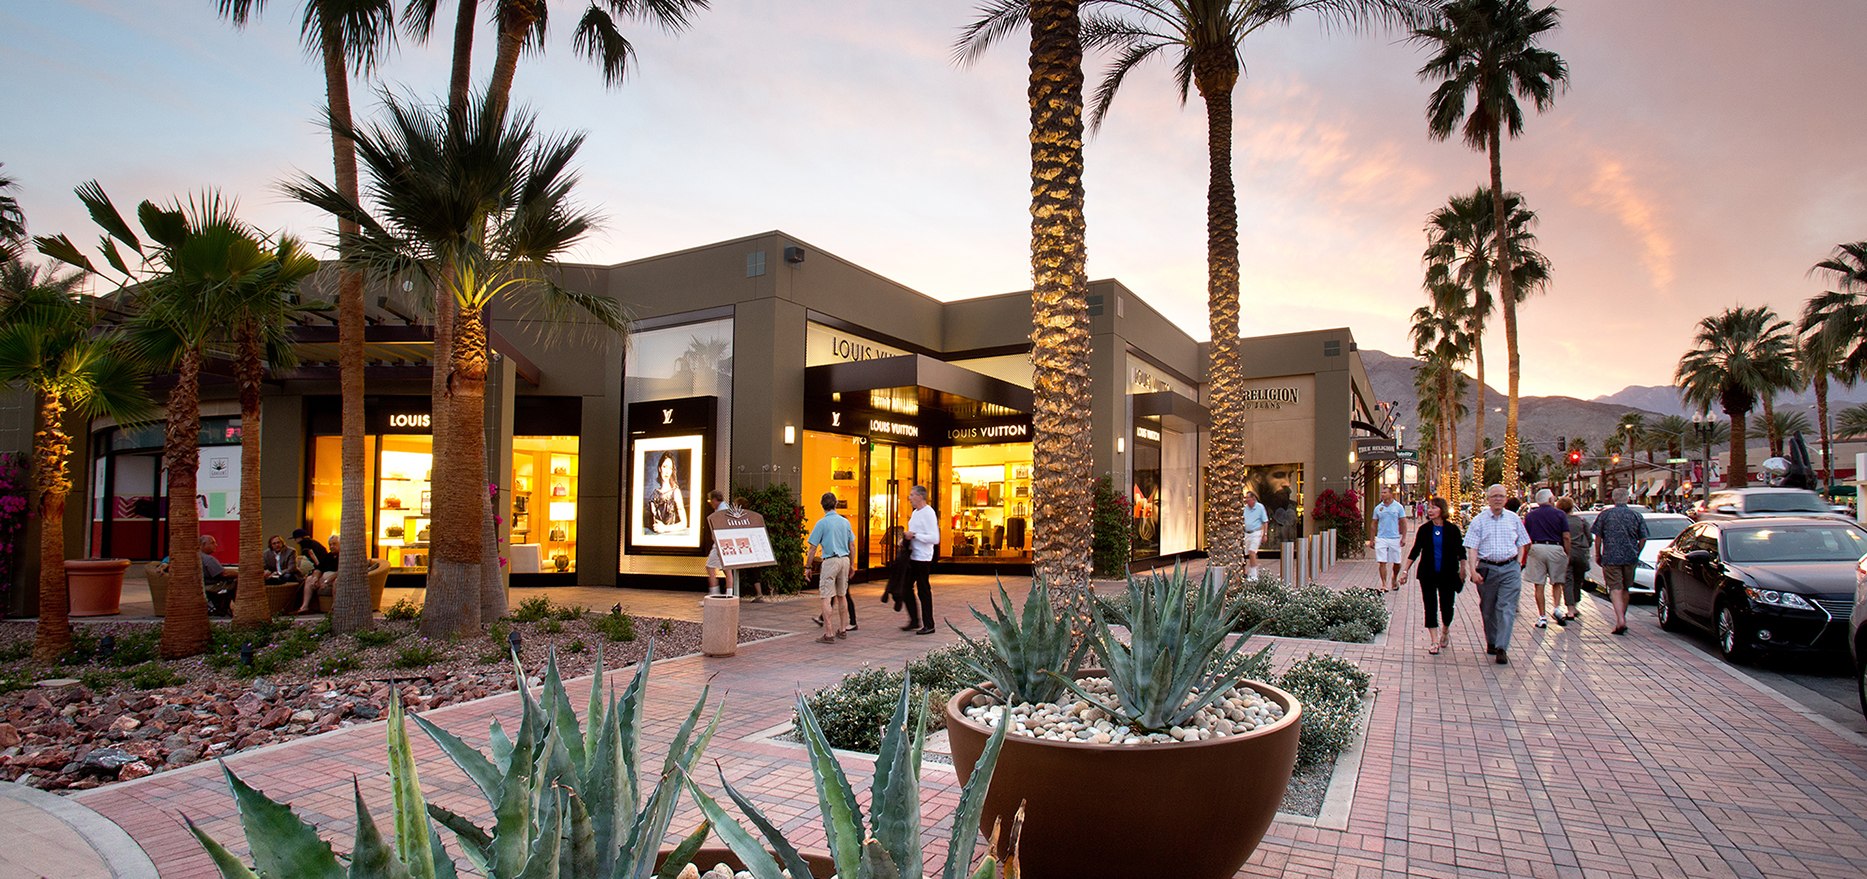 The Gardens on El Paseo - Shopping Mall